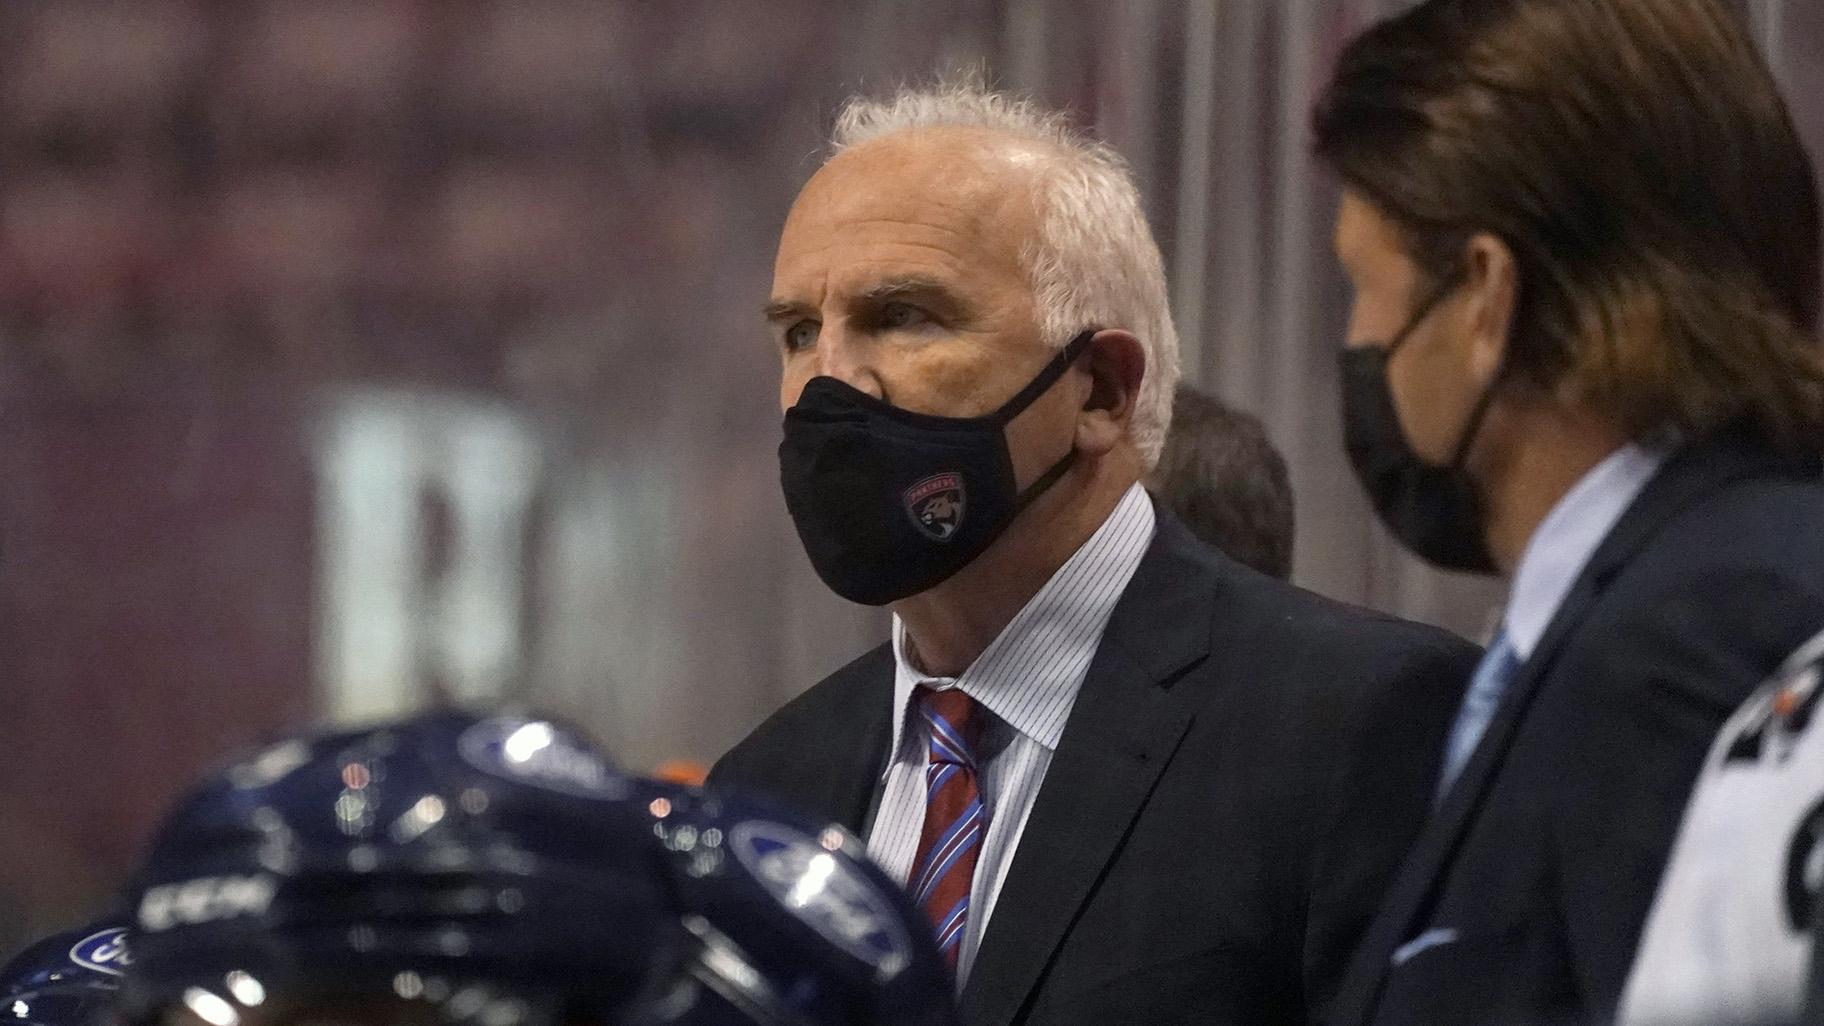 In this Friday, Feb. 5, 2021 file photo, Florida Panthers head coach Joel Quenneville looks on during the third period of an NHL hockey game against the Nashville Predators in Sunrise, Fla. (AP Photo / Wilfredo Lee, File)